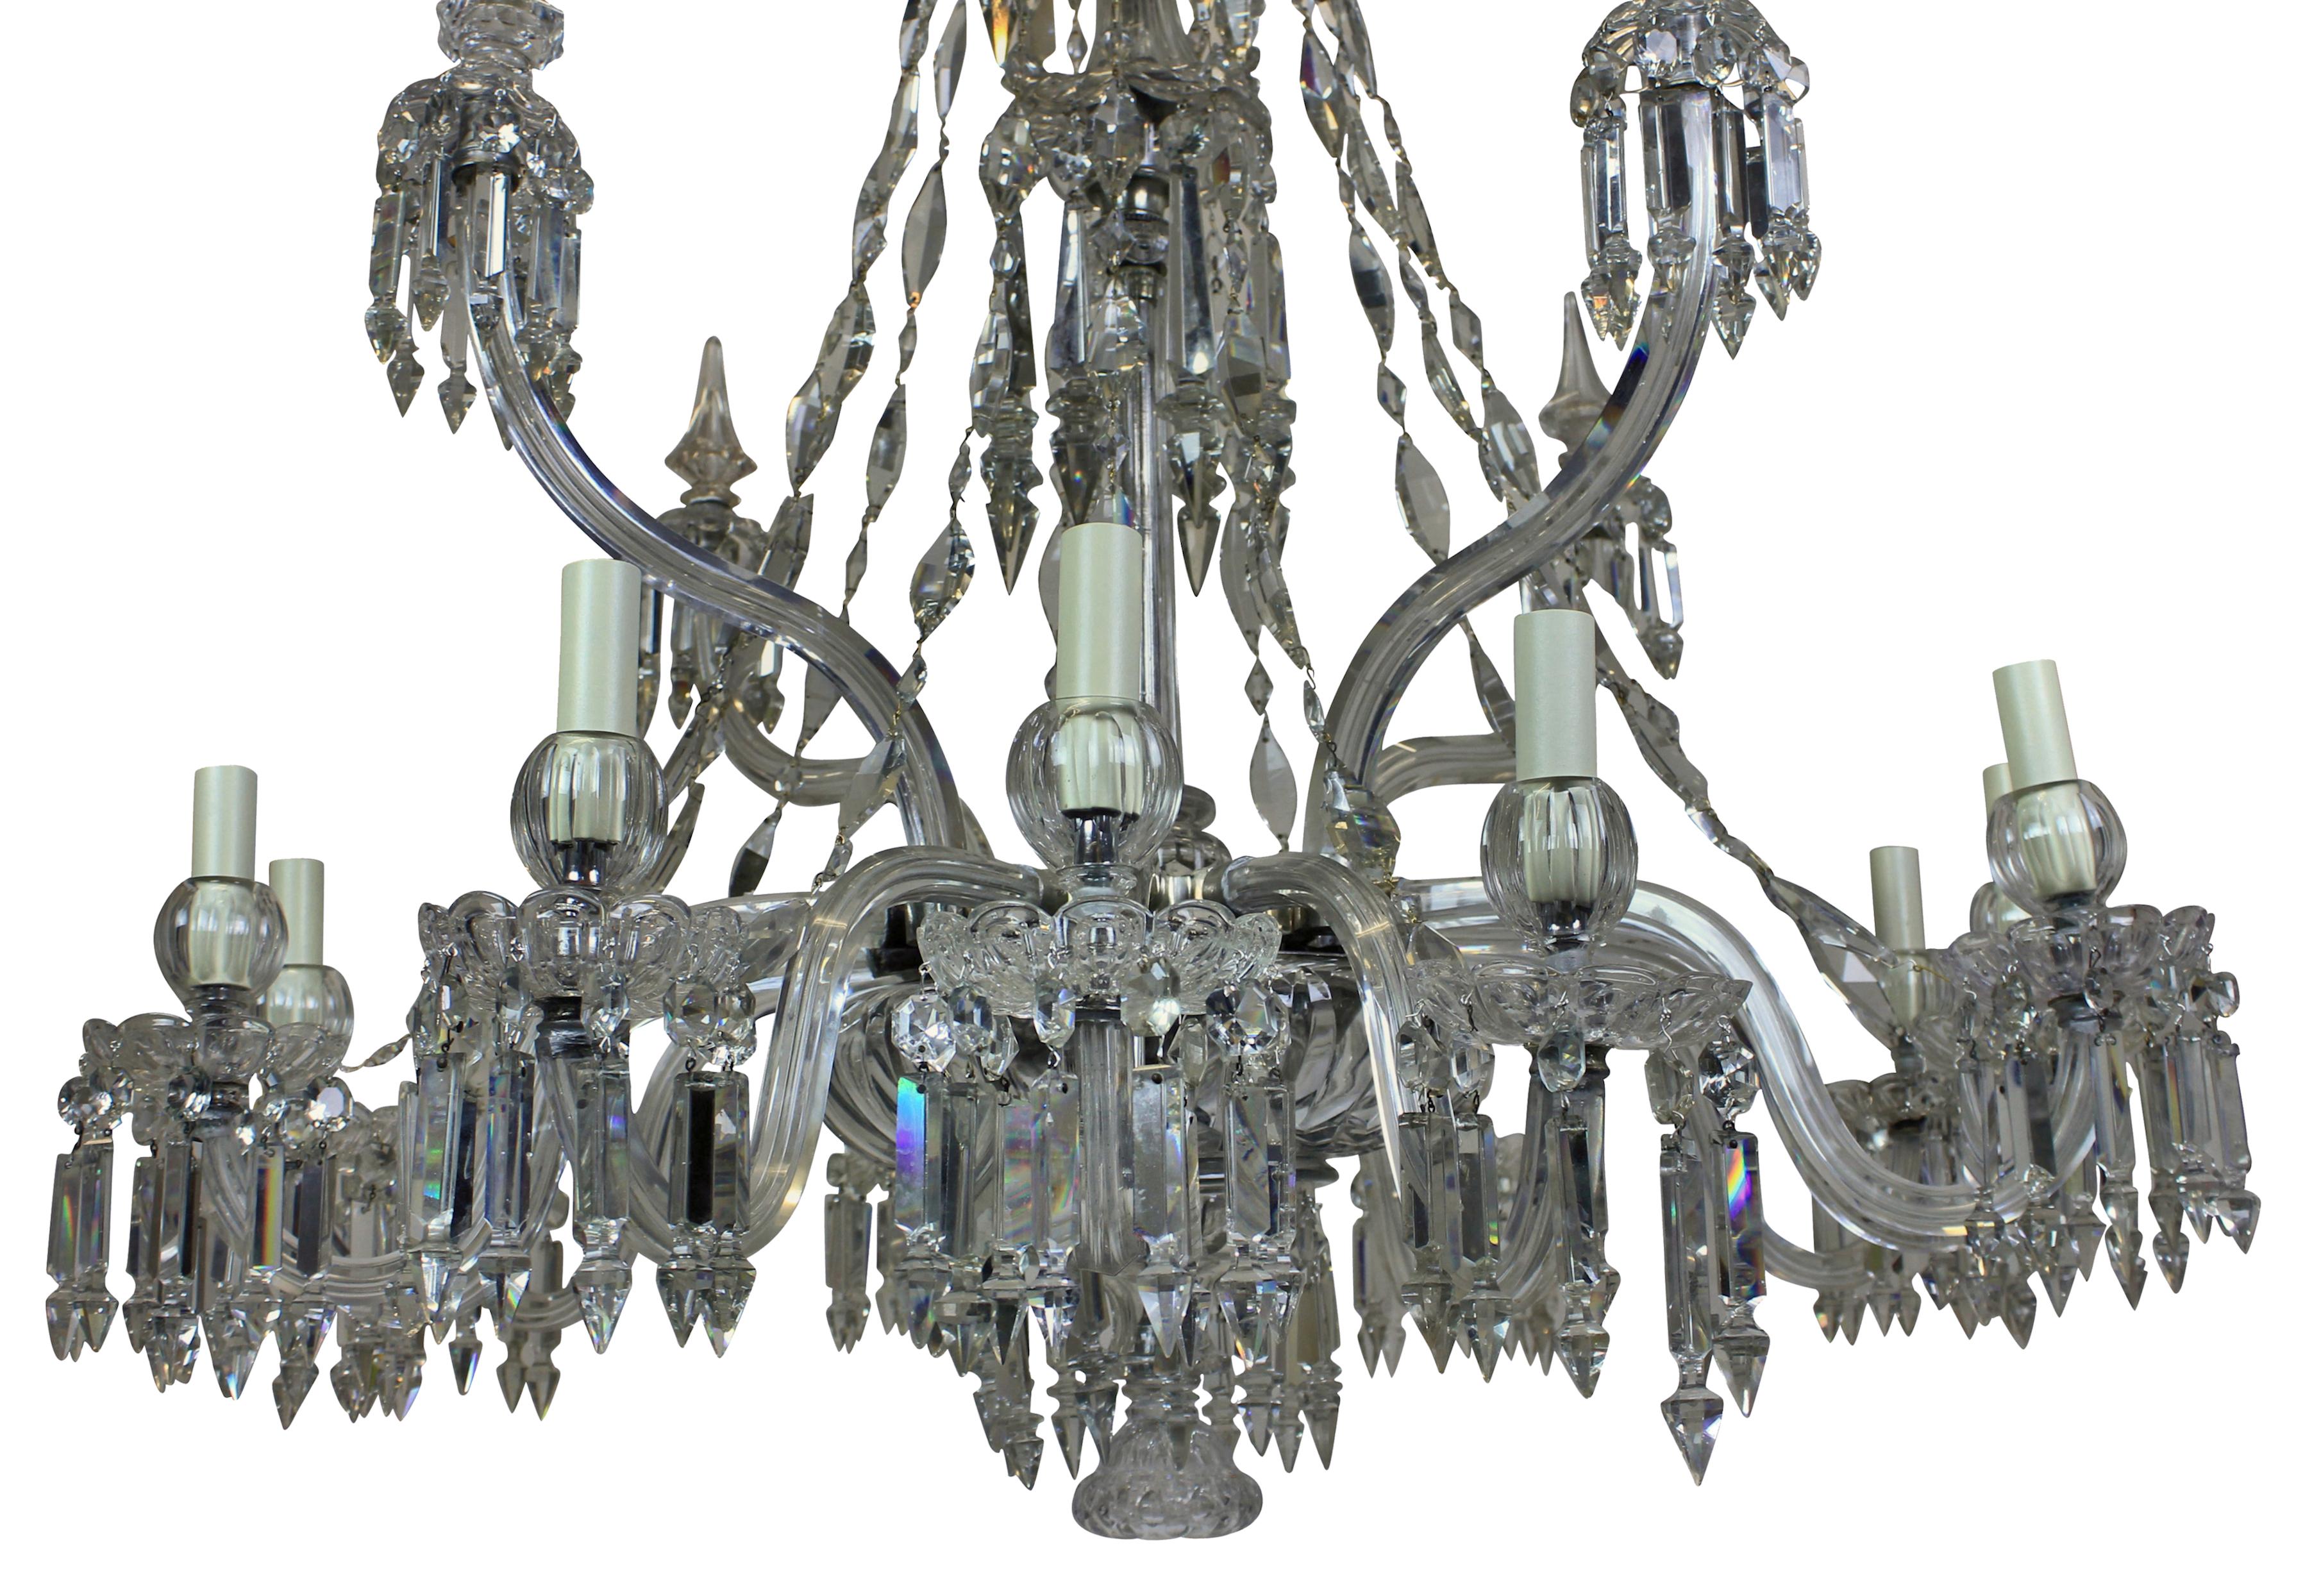 A fine English cut glass chandelier by F & C Osler. Formerly a gasolier and now electrified. With twelve arms hung throughout with finely cut diamond shaped chains and four large up-swept arms with spikes. The chains of diamond shape are a unique